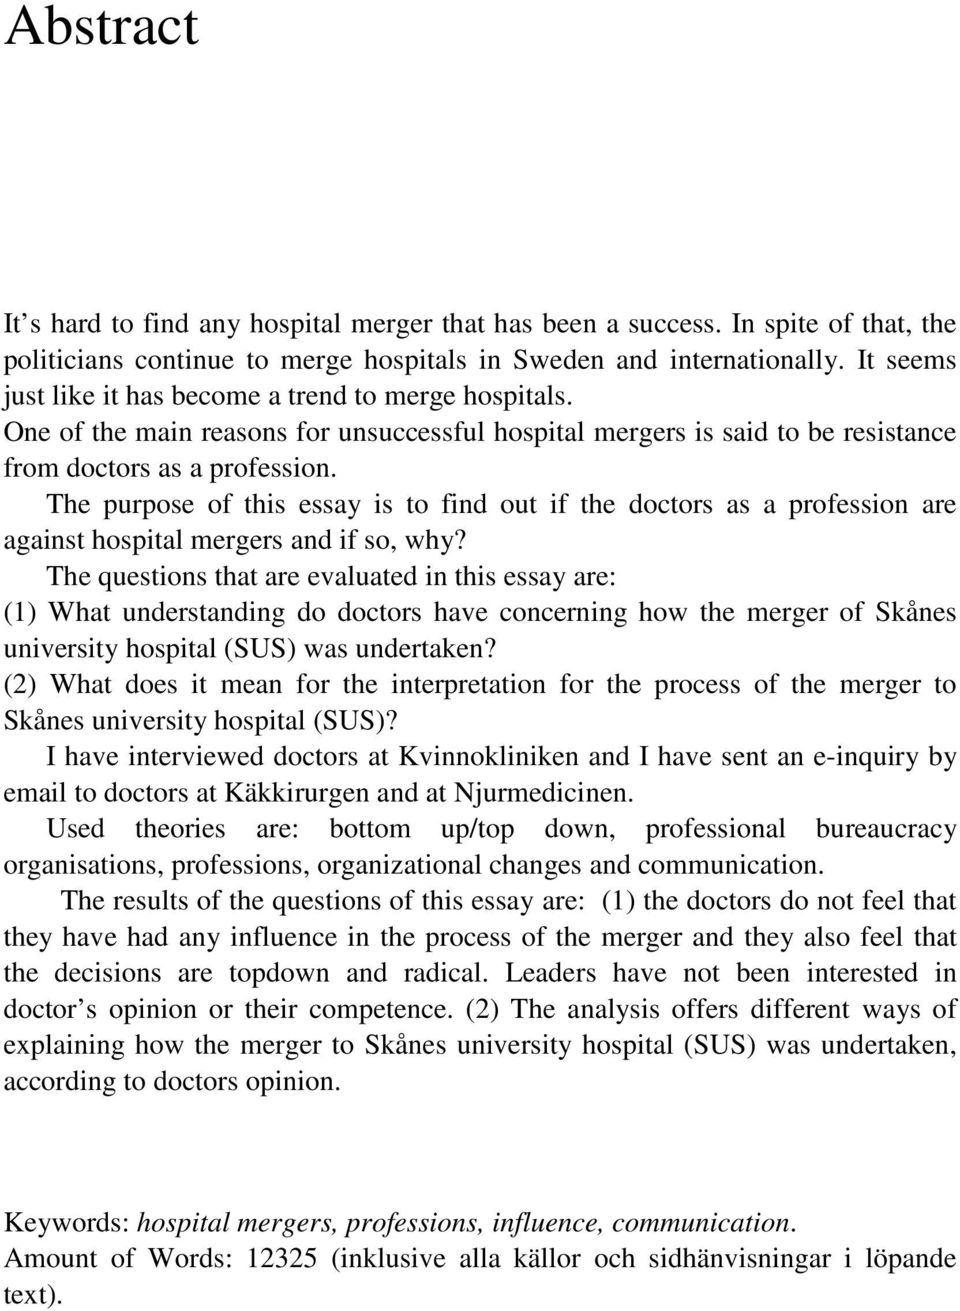 The purpose of this essay is to find out if the doctors as a profession are against hospital mergers and if so, why?